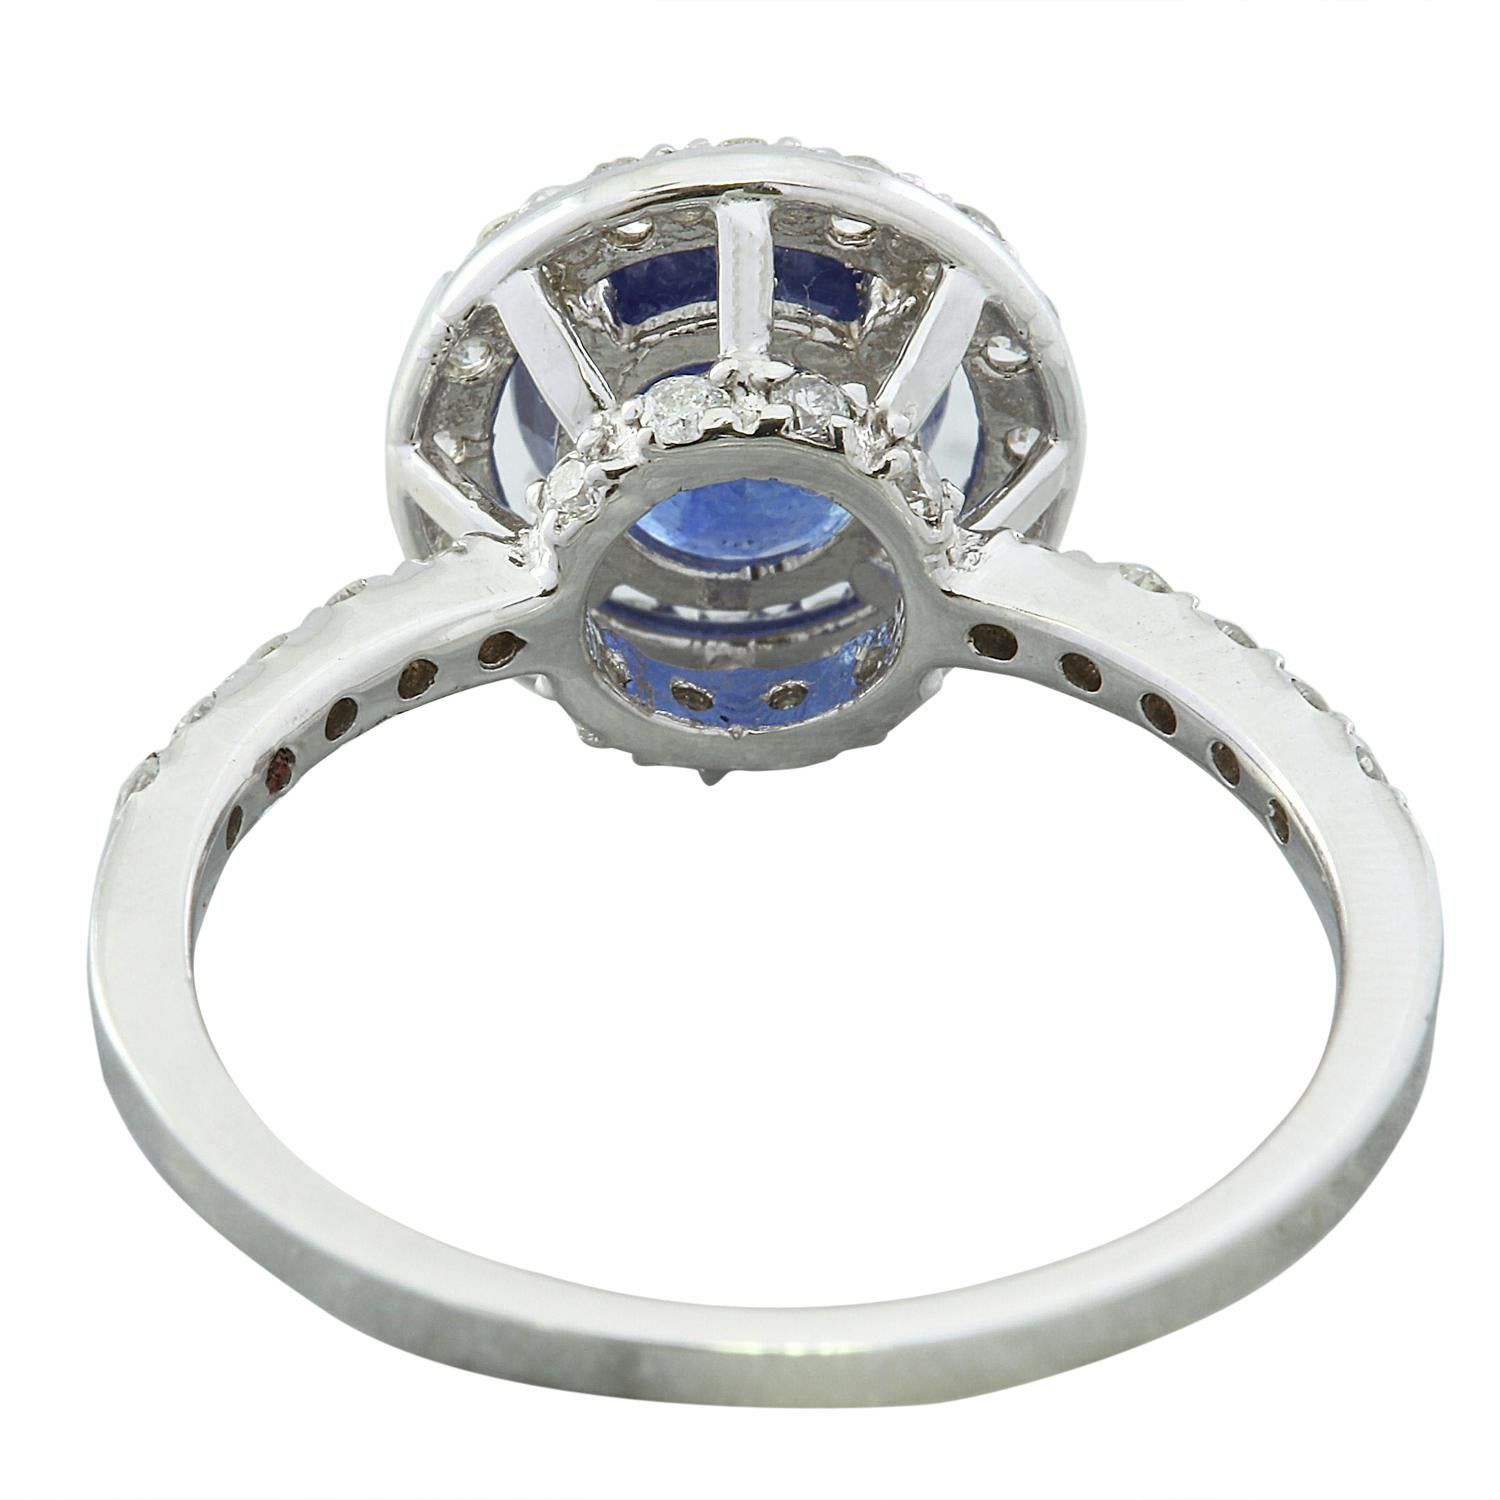 2.61 Carat Natural Sapphire 14 Karat Solid White Gold Diamond Ring In New Condition For Sale In Los Angeles, CA